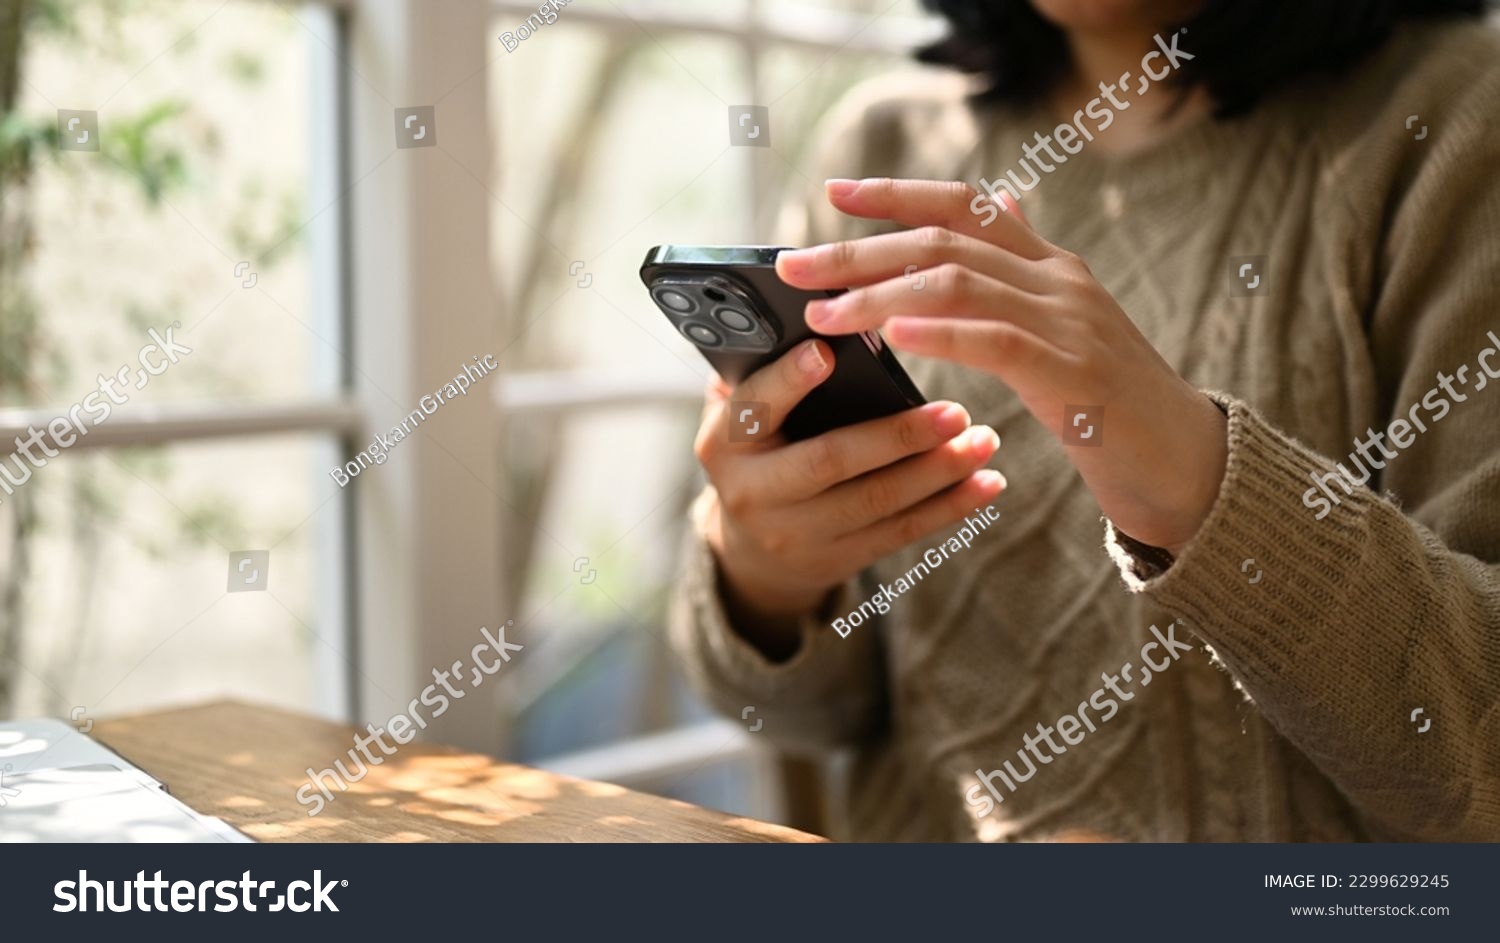 Close-up shot of an Asian woman in cozy sweater using her smartphone, chatting with someone or scrolling on her phone while relaxing at a cafe. #2299629245